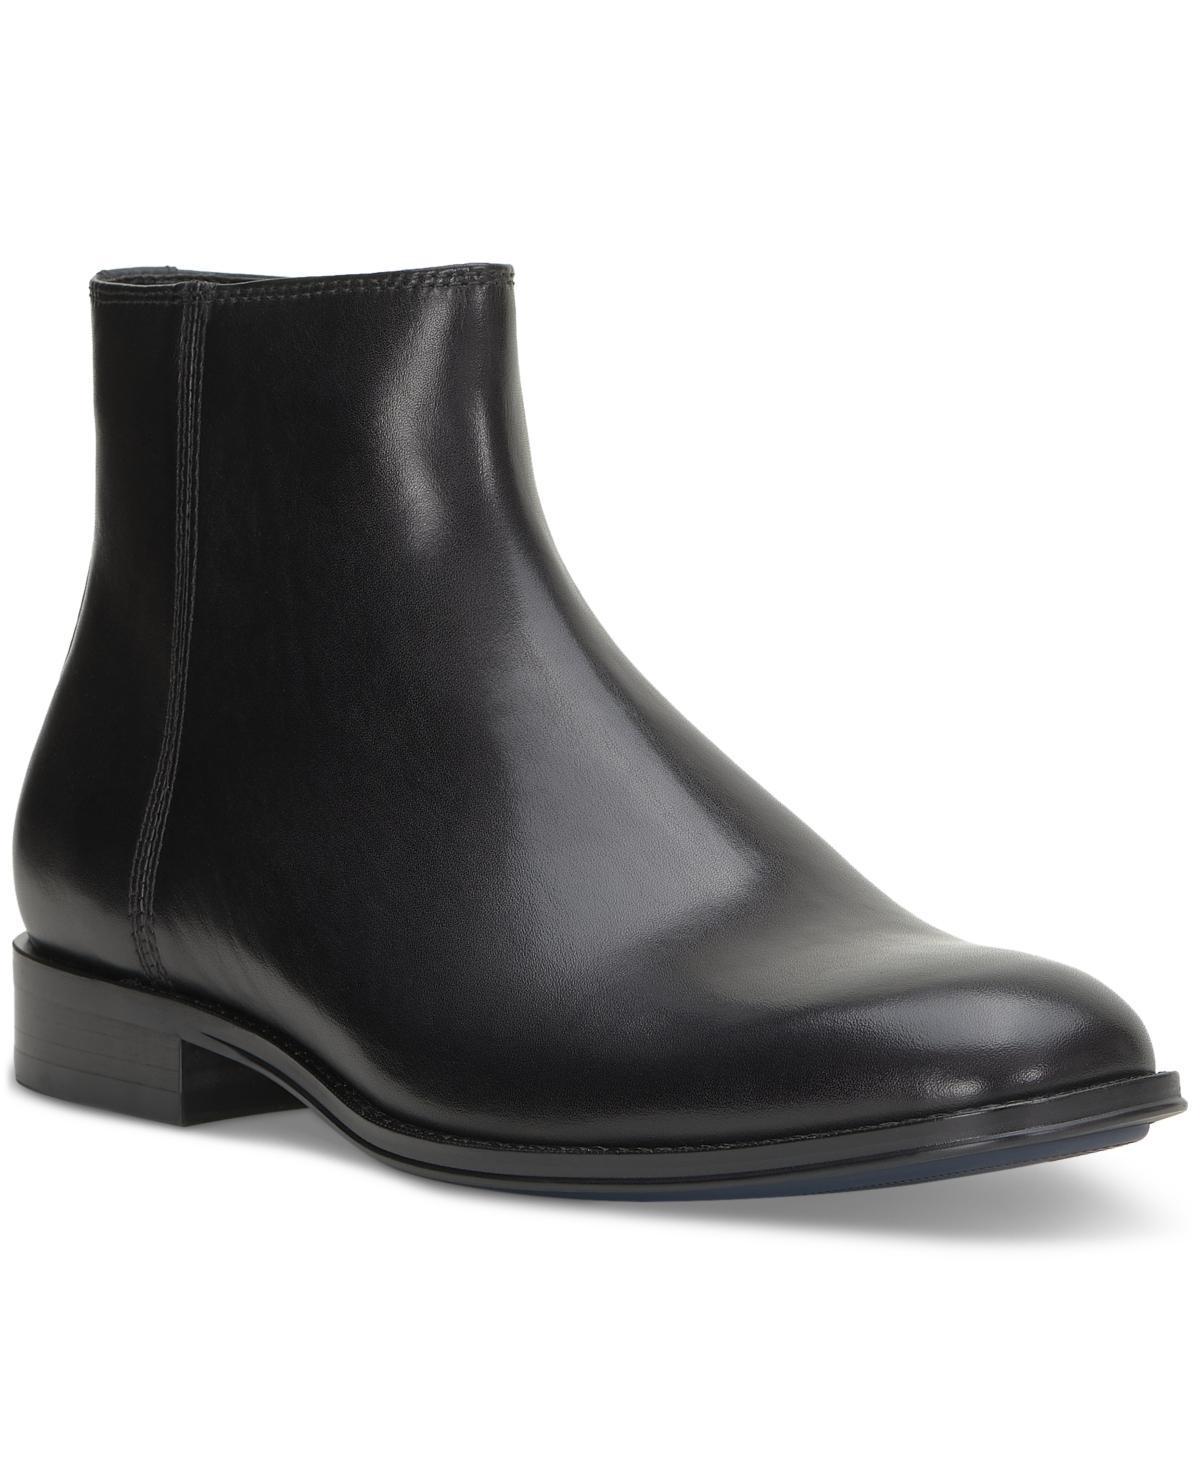 Vince Camuto Firat Zip Boot Product Image